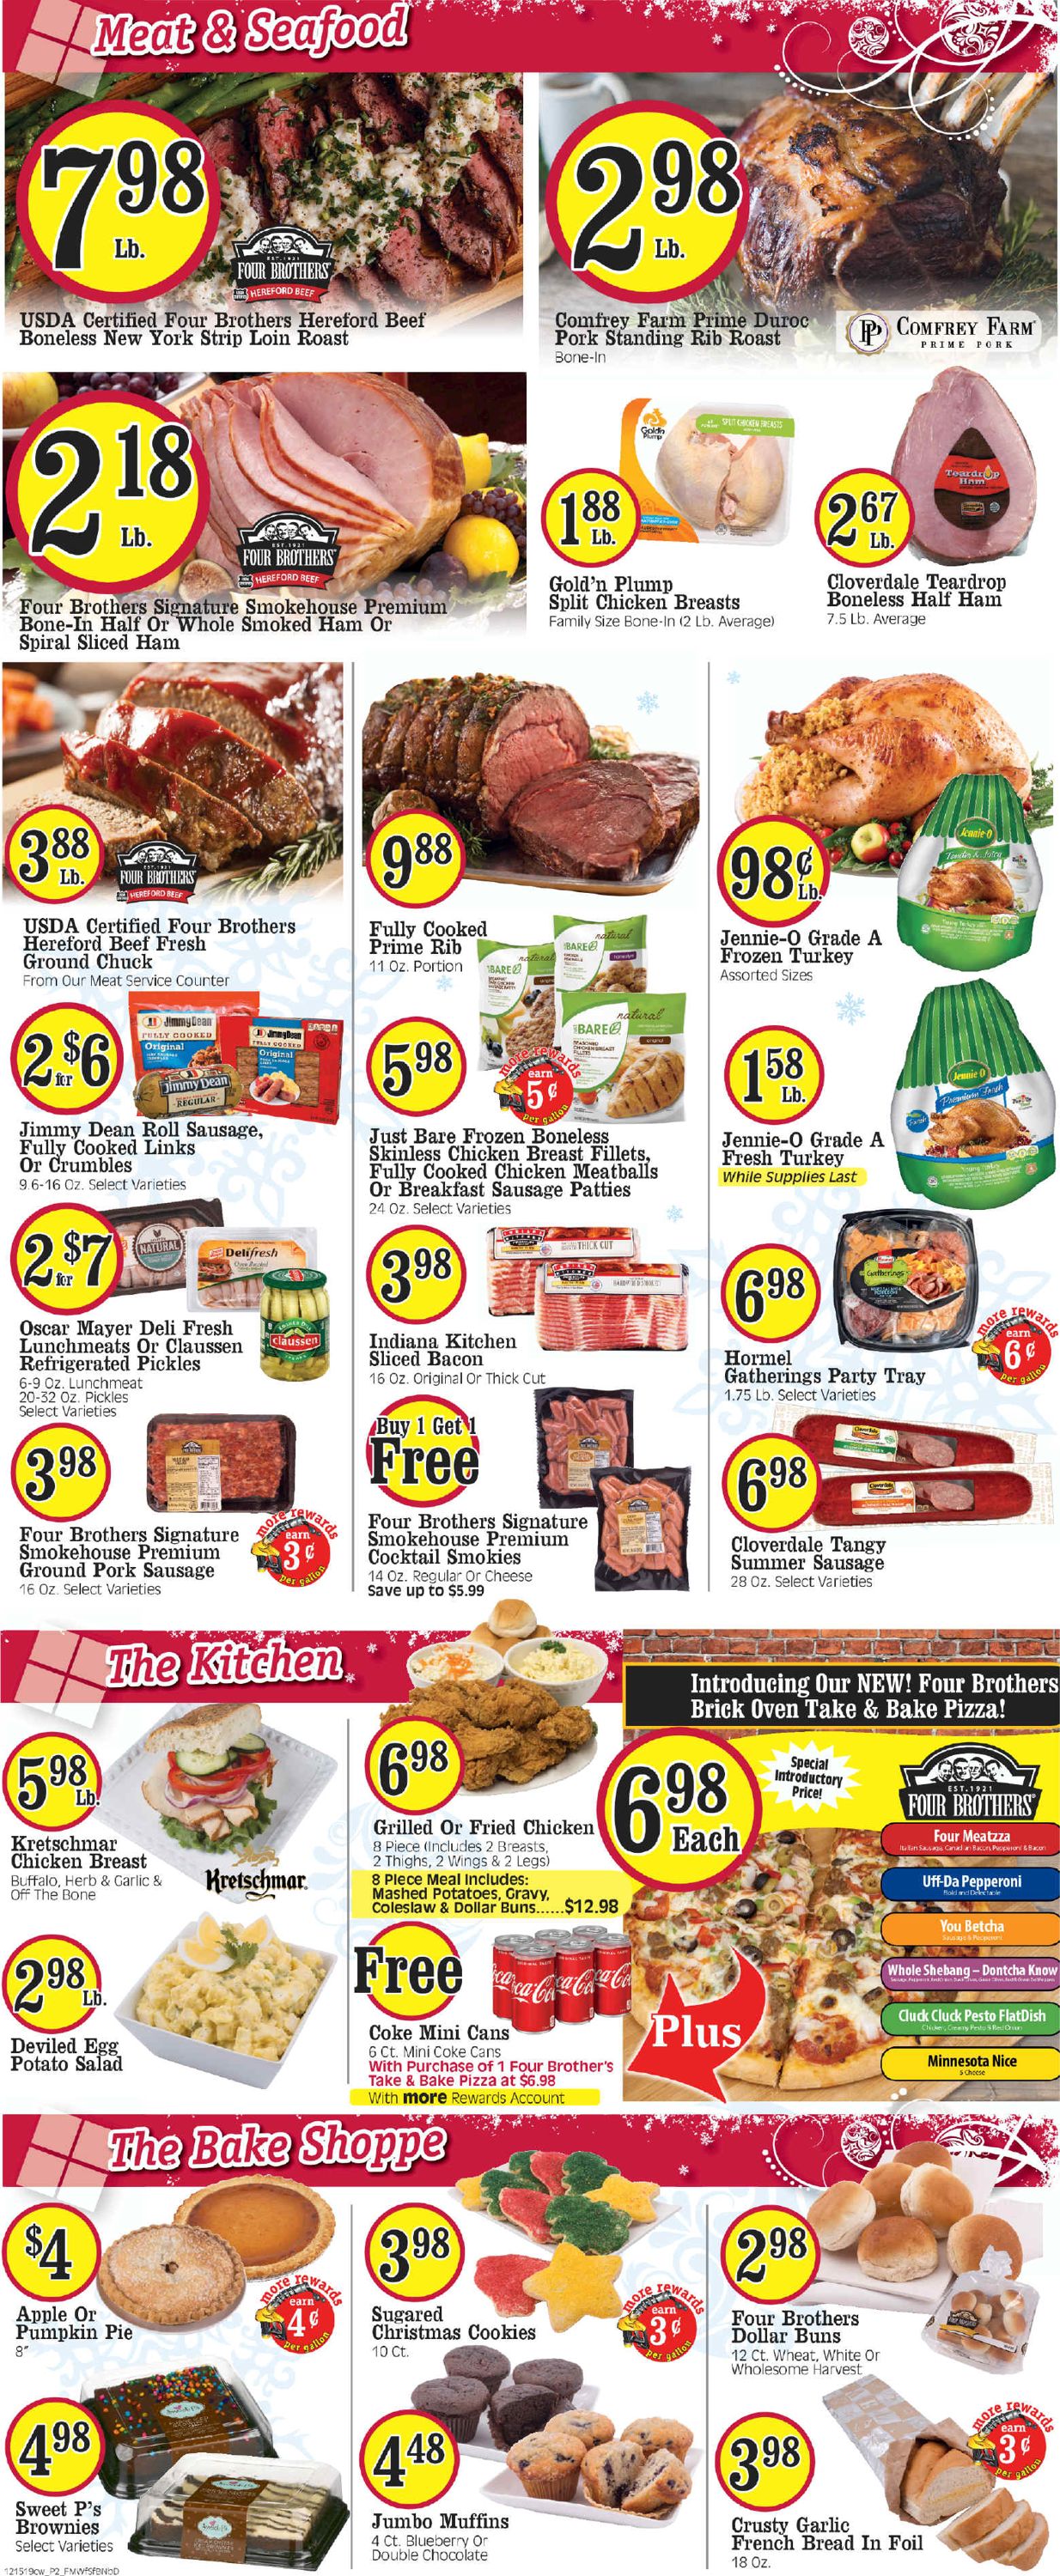 Cash Wise Weekly Ad Circular - valid 12/15-12/21/2019 (Page 2)